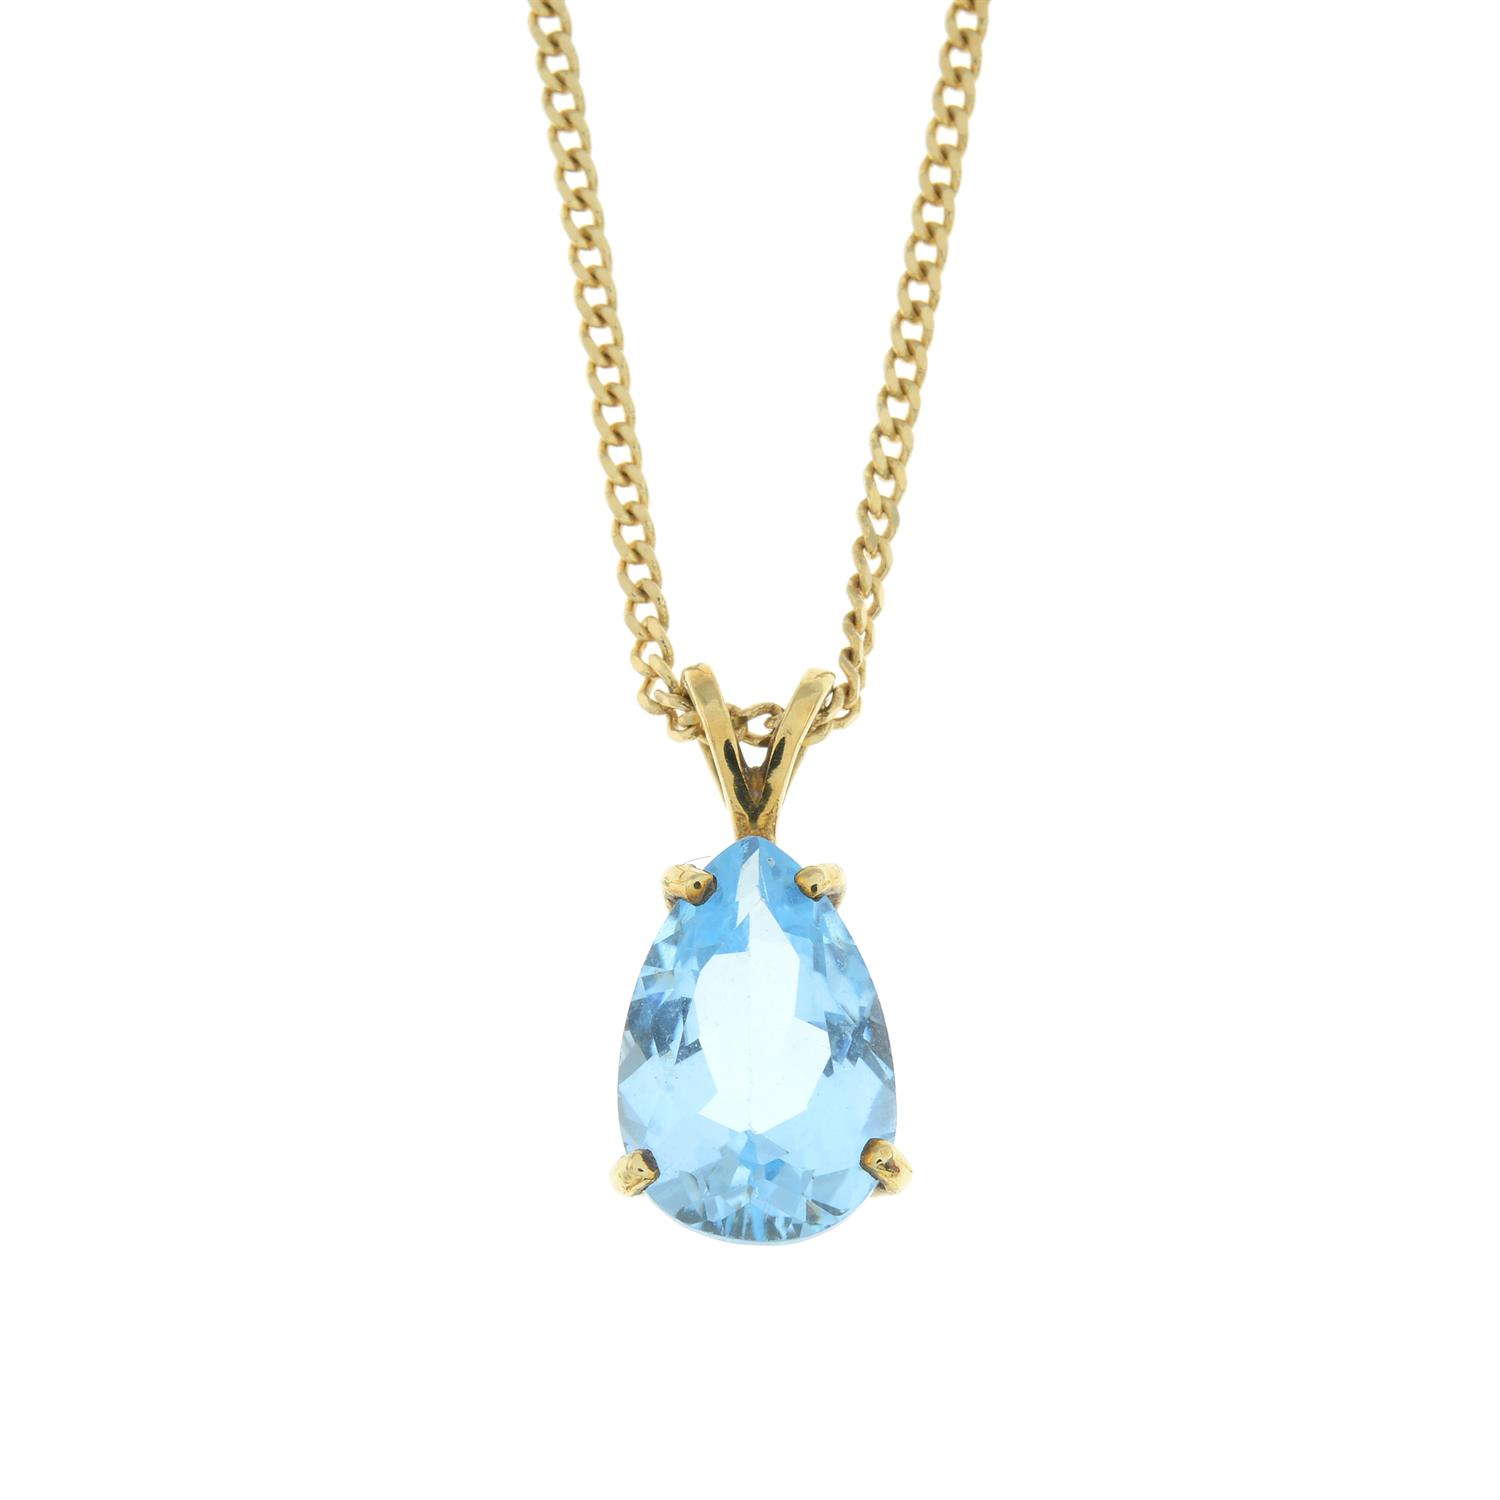 Pear-shape topaz pendant, with 9ct gold chain